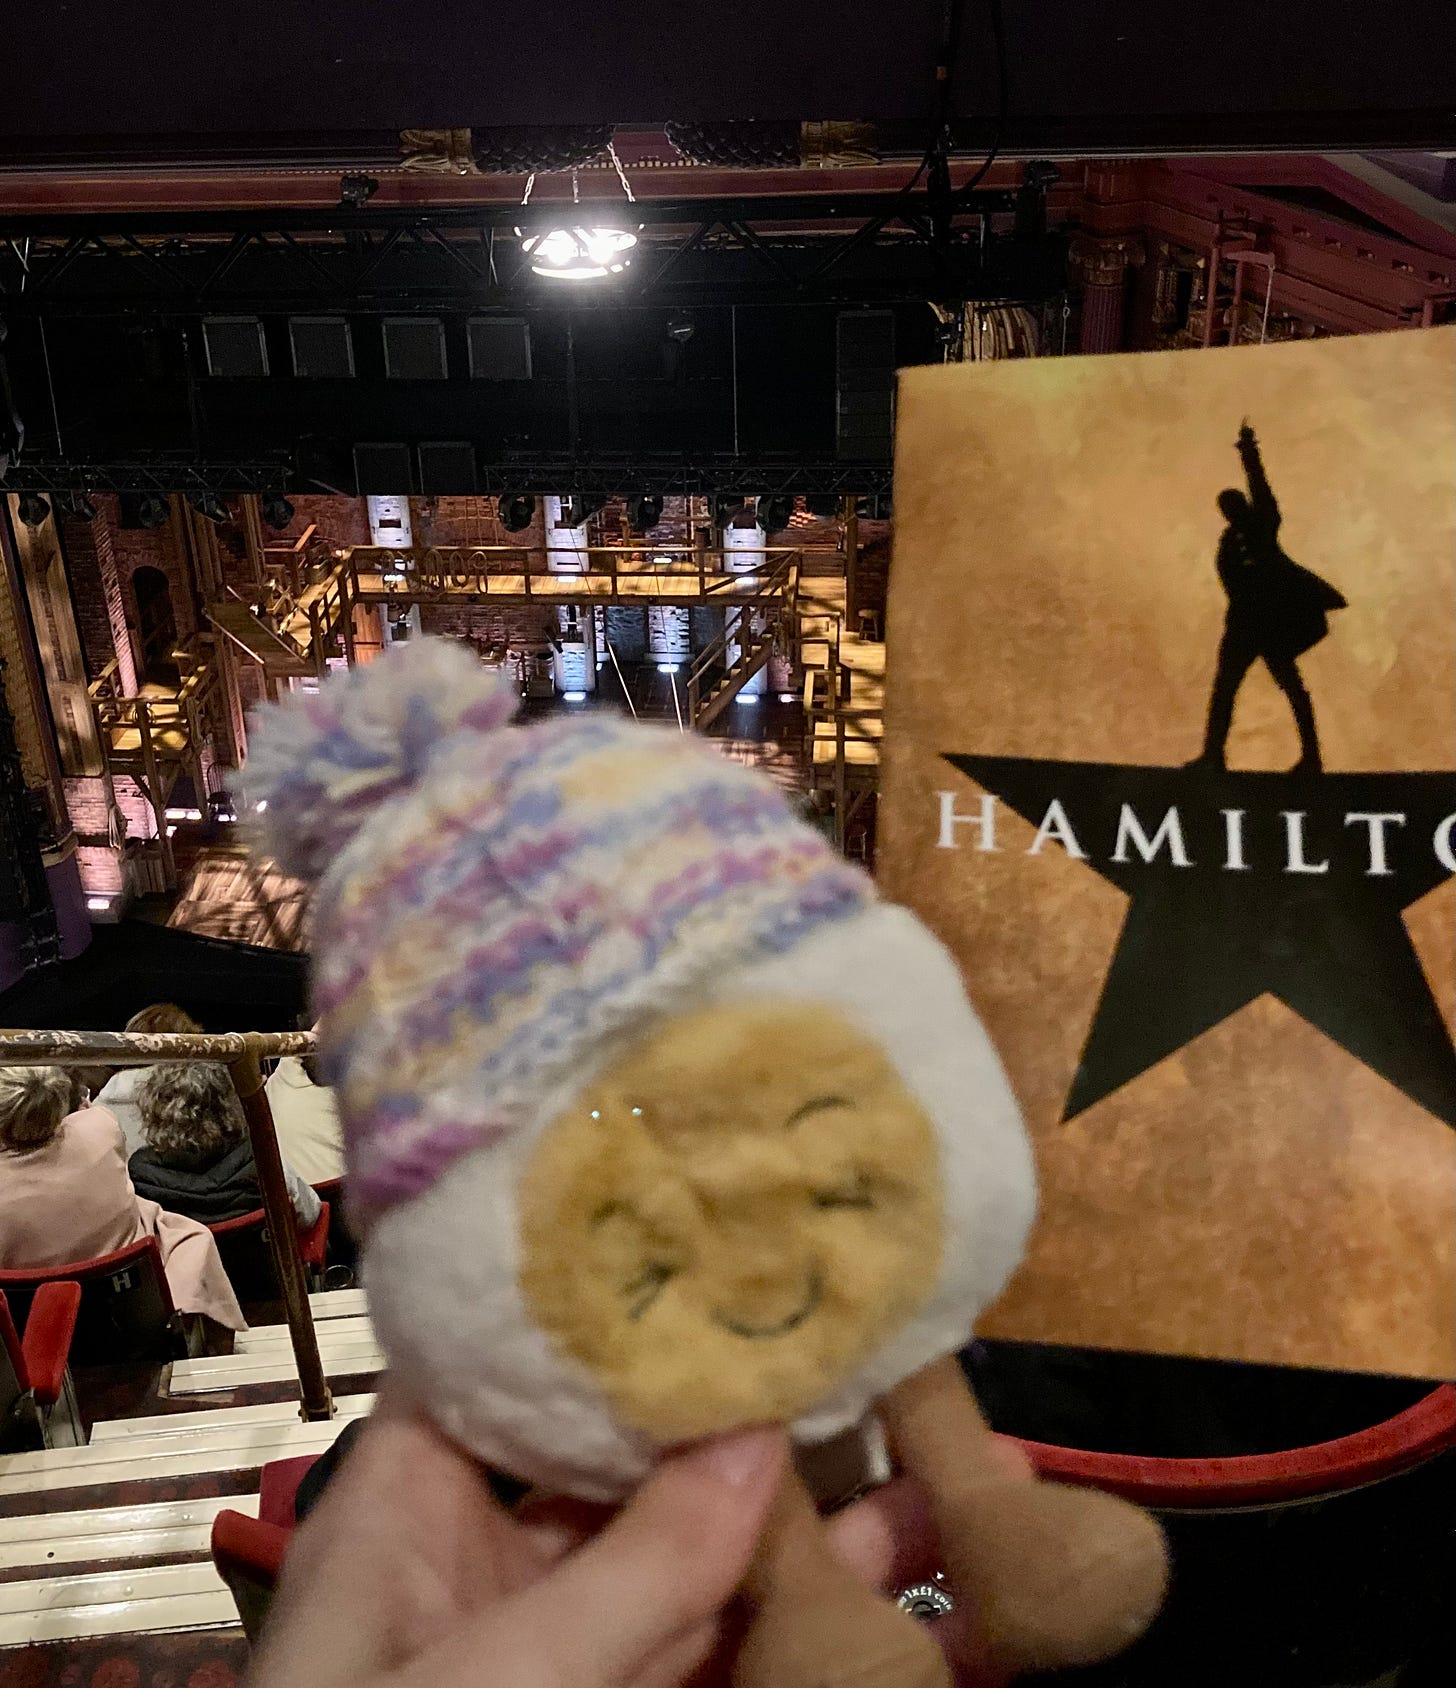 Photo of Dippy, the soft toy egg in a bobble hat, in theatre seats awaiting the musical performance of Hamilton. The stage is set with wooden scaffolding and Dippy is framed by a program displaying the signature Hamilton star silhouette on a gold background.